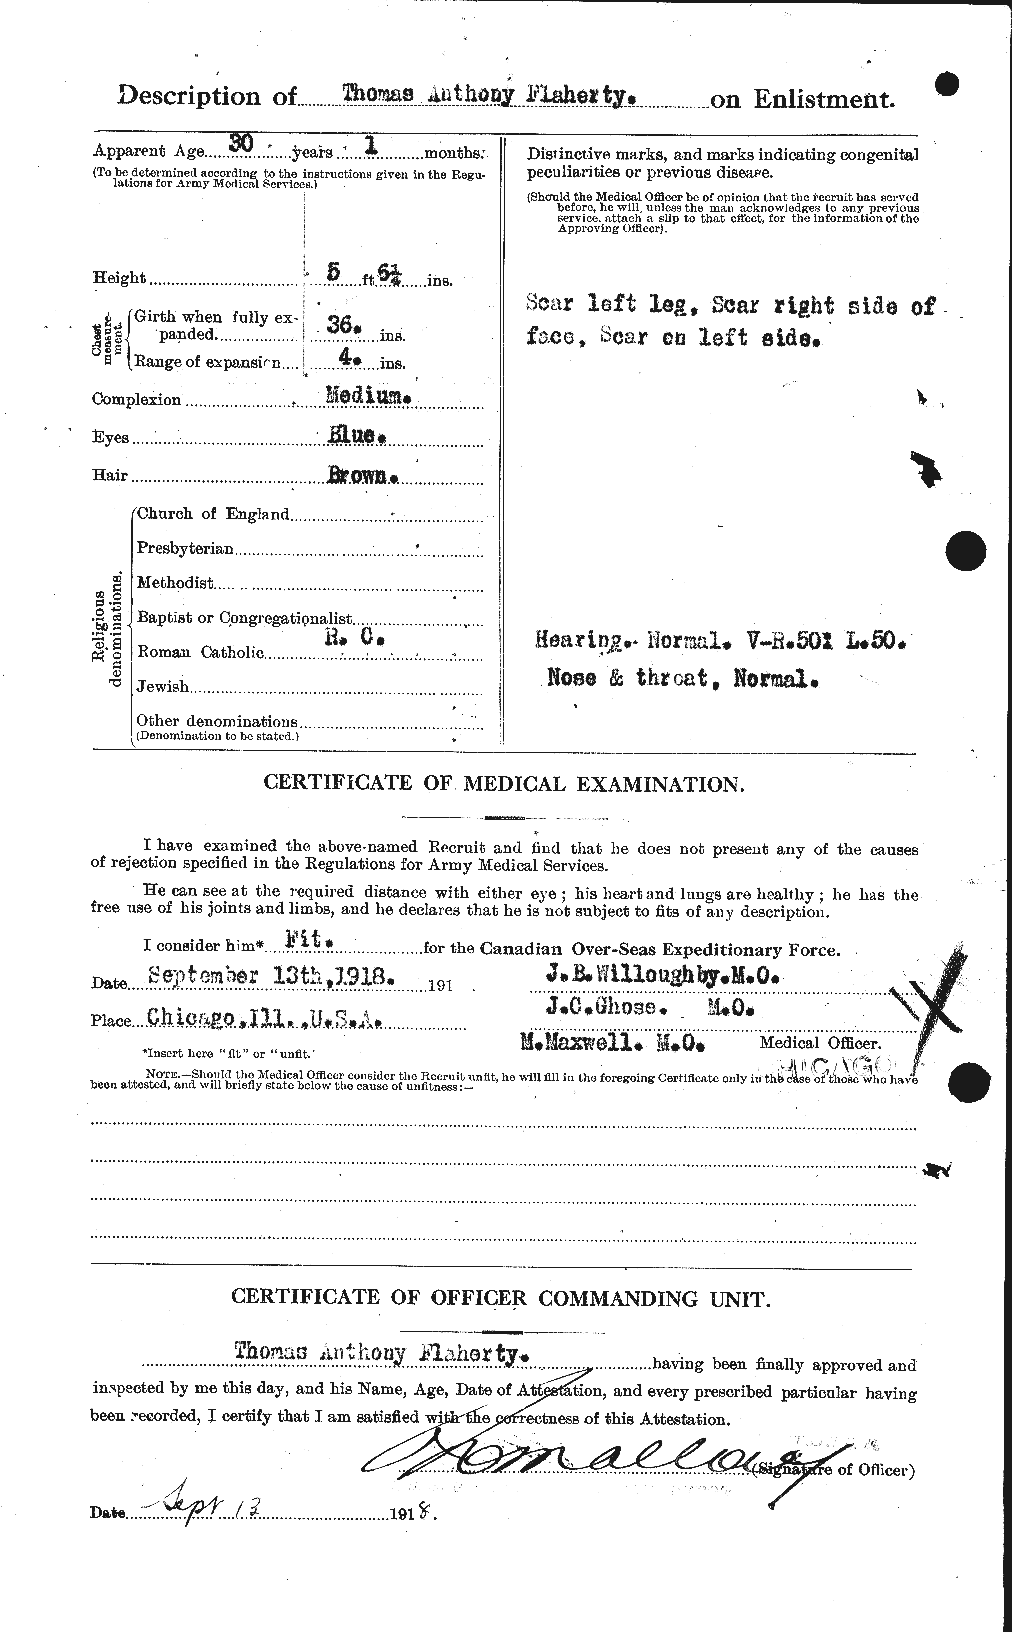 Personnel Records of the First World War - CEF 323383b